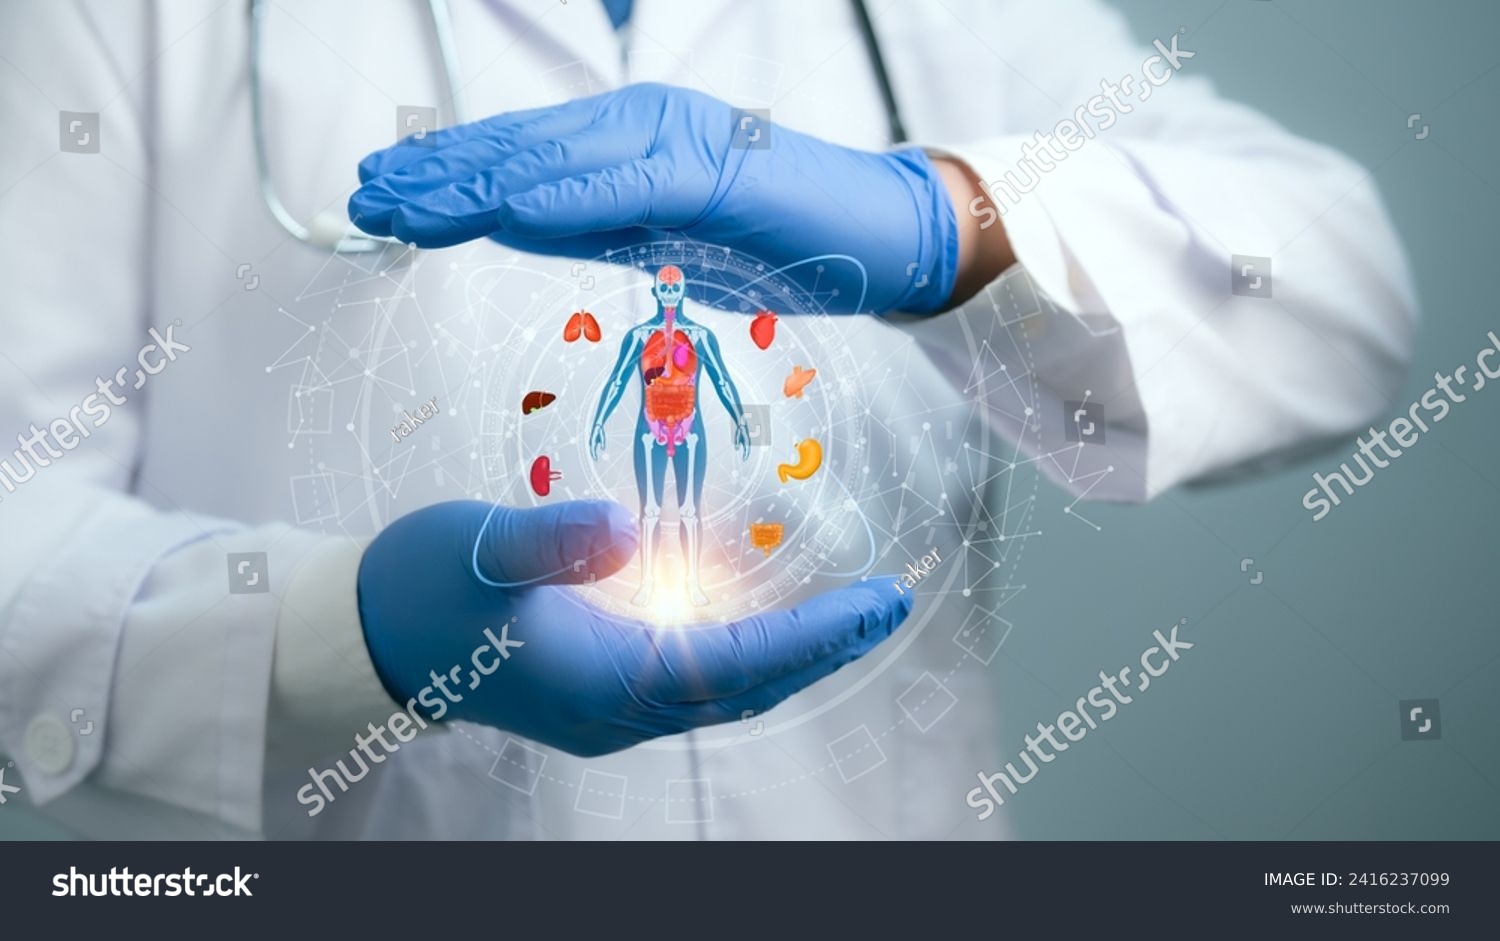 Medical worker holding hologram of a human body with human organs in concept of health. Medical future technology and innovative concept.Elevate healthcare with AI technology services. #2416237099